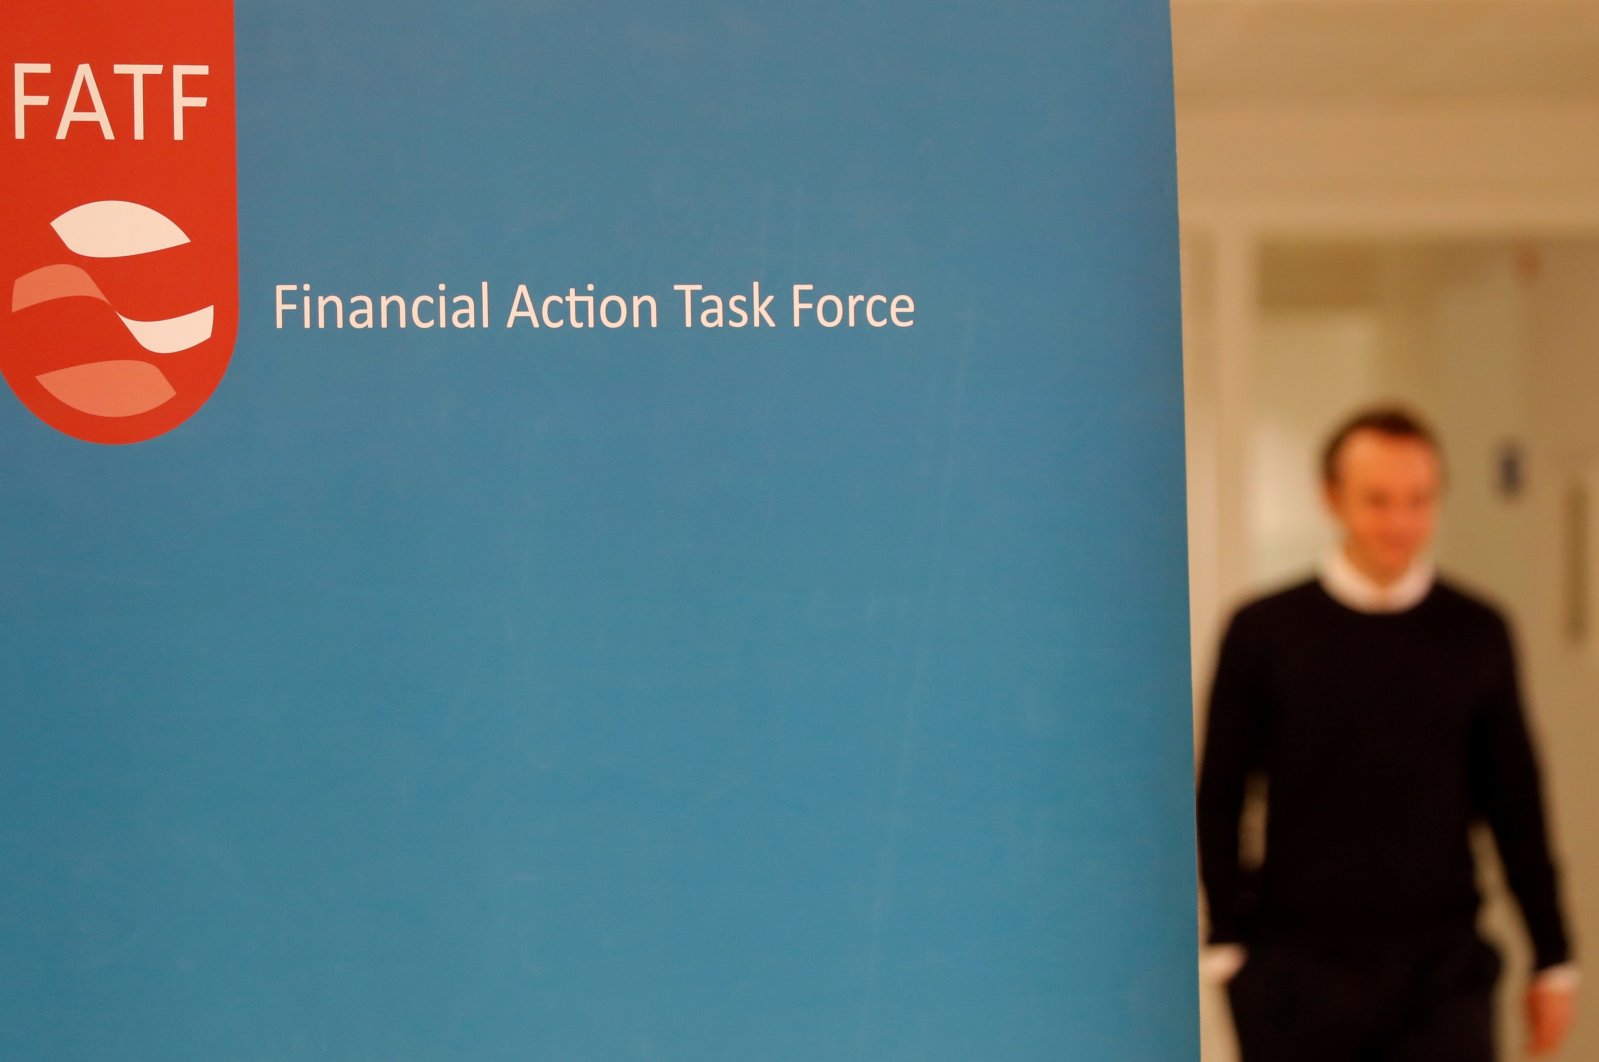 The logo of the Financial Action Task Force (FATF) is seen during a news conference after a plenary session at the OECD headquarters in Paris, France, Oct. 18, 2019. (Reuters Photo)